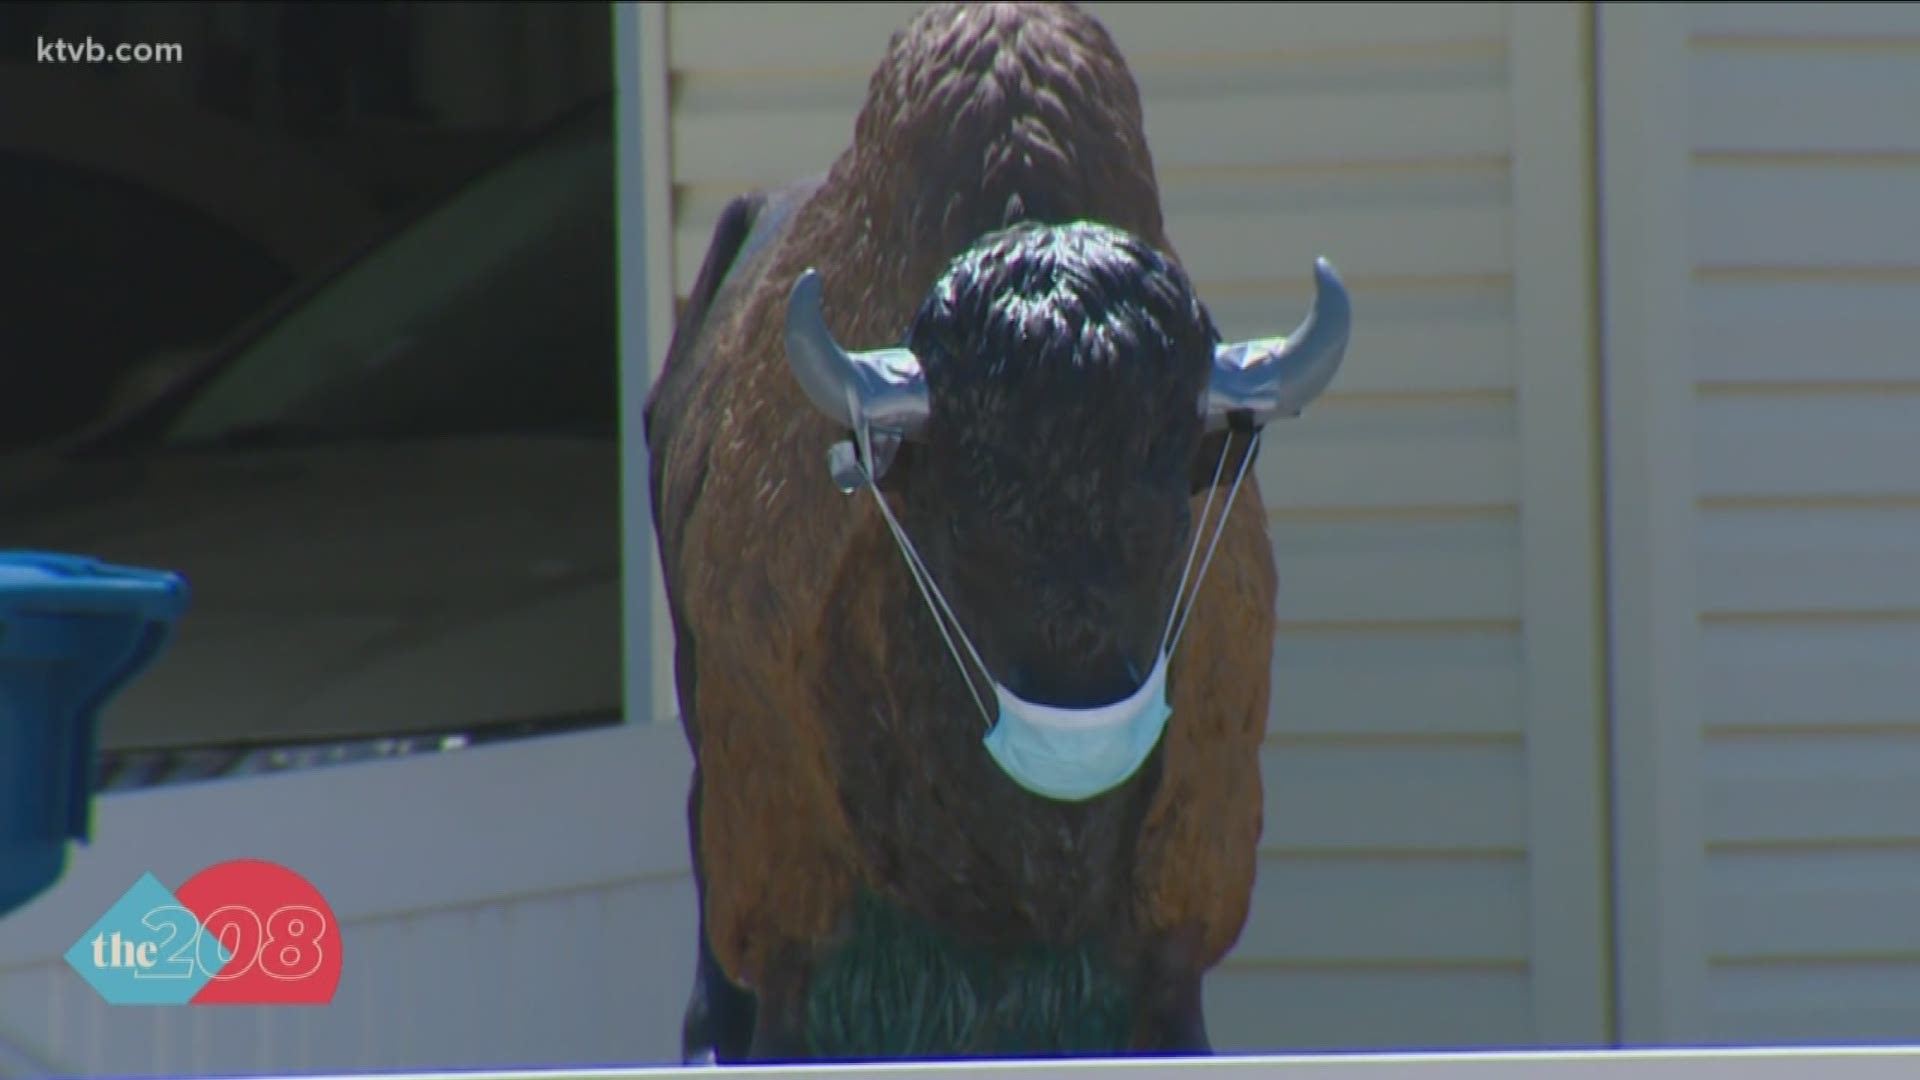 John Hall has had two faux buffalo in his yard for years. Hall began decorating them after his wife passed, and received an interesting idea from his neighbor.